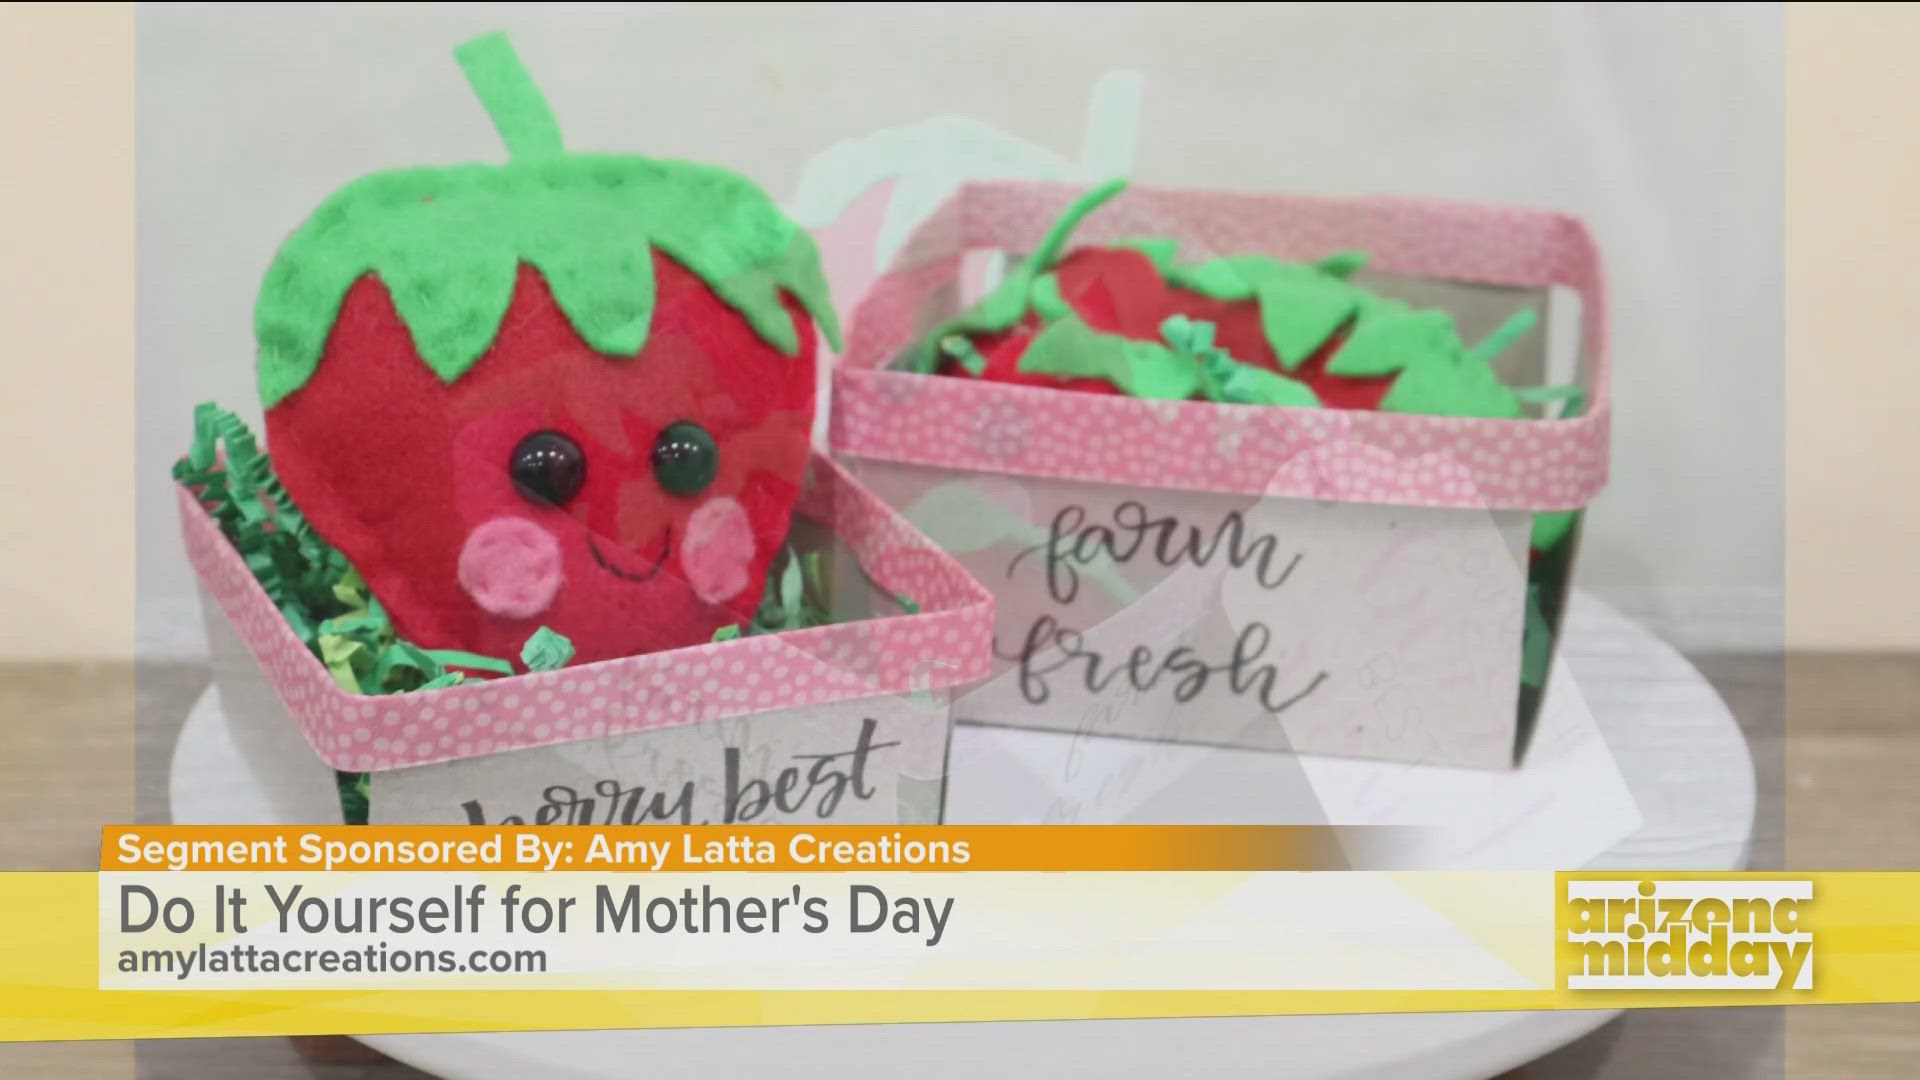 Crafting diva Amy Latta shows us some easy and fun DIY gifts the kids can make for Mom just in time for Mother’s Day